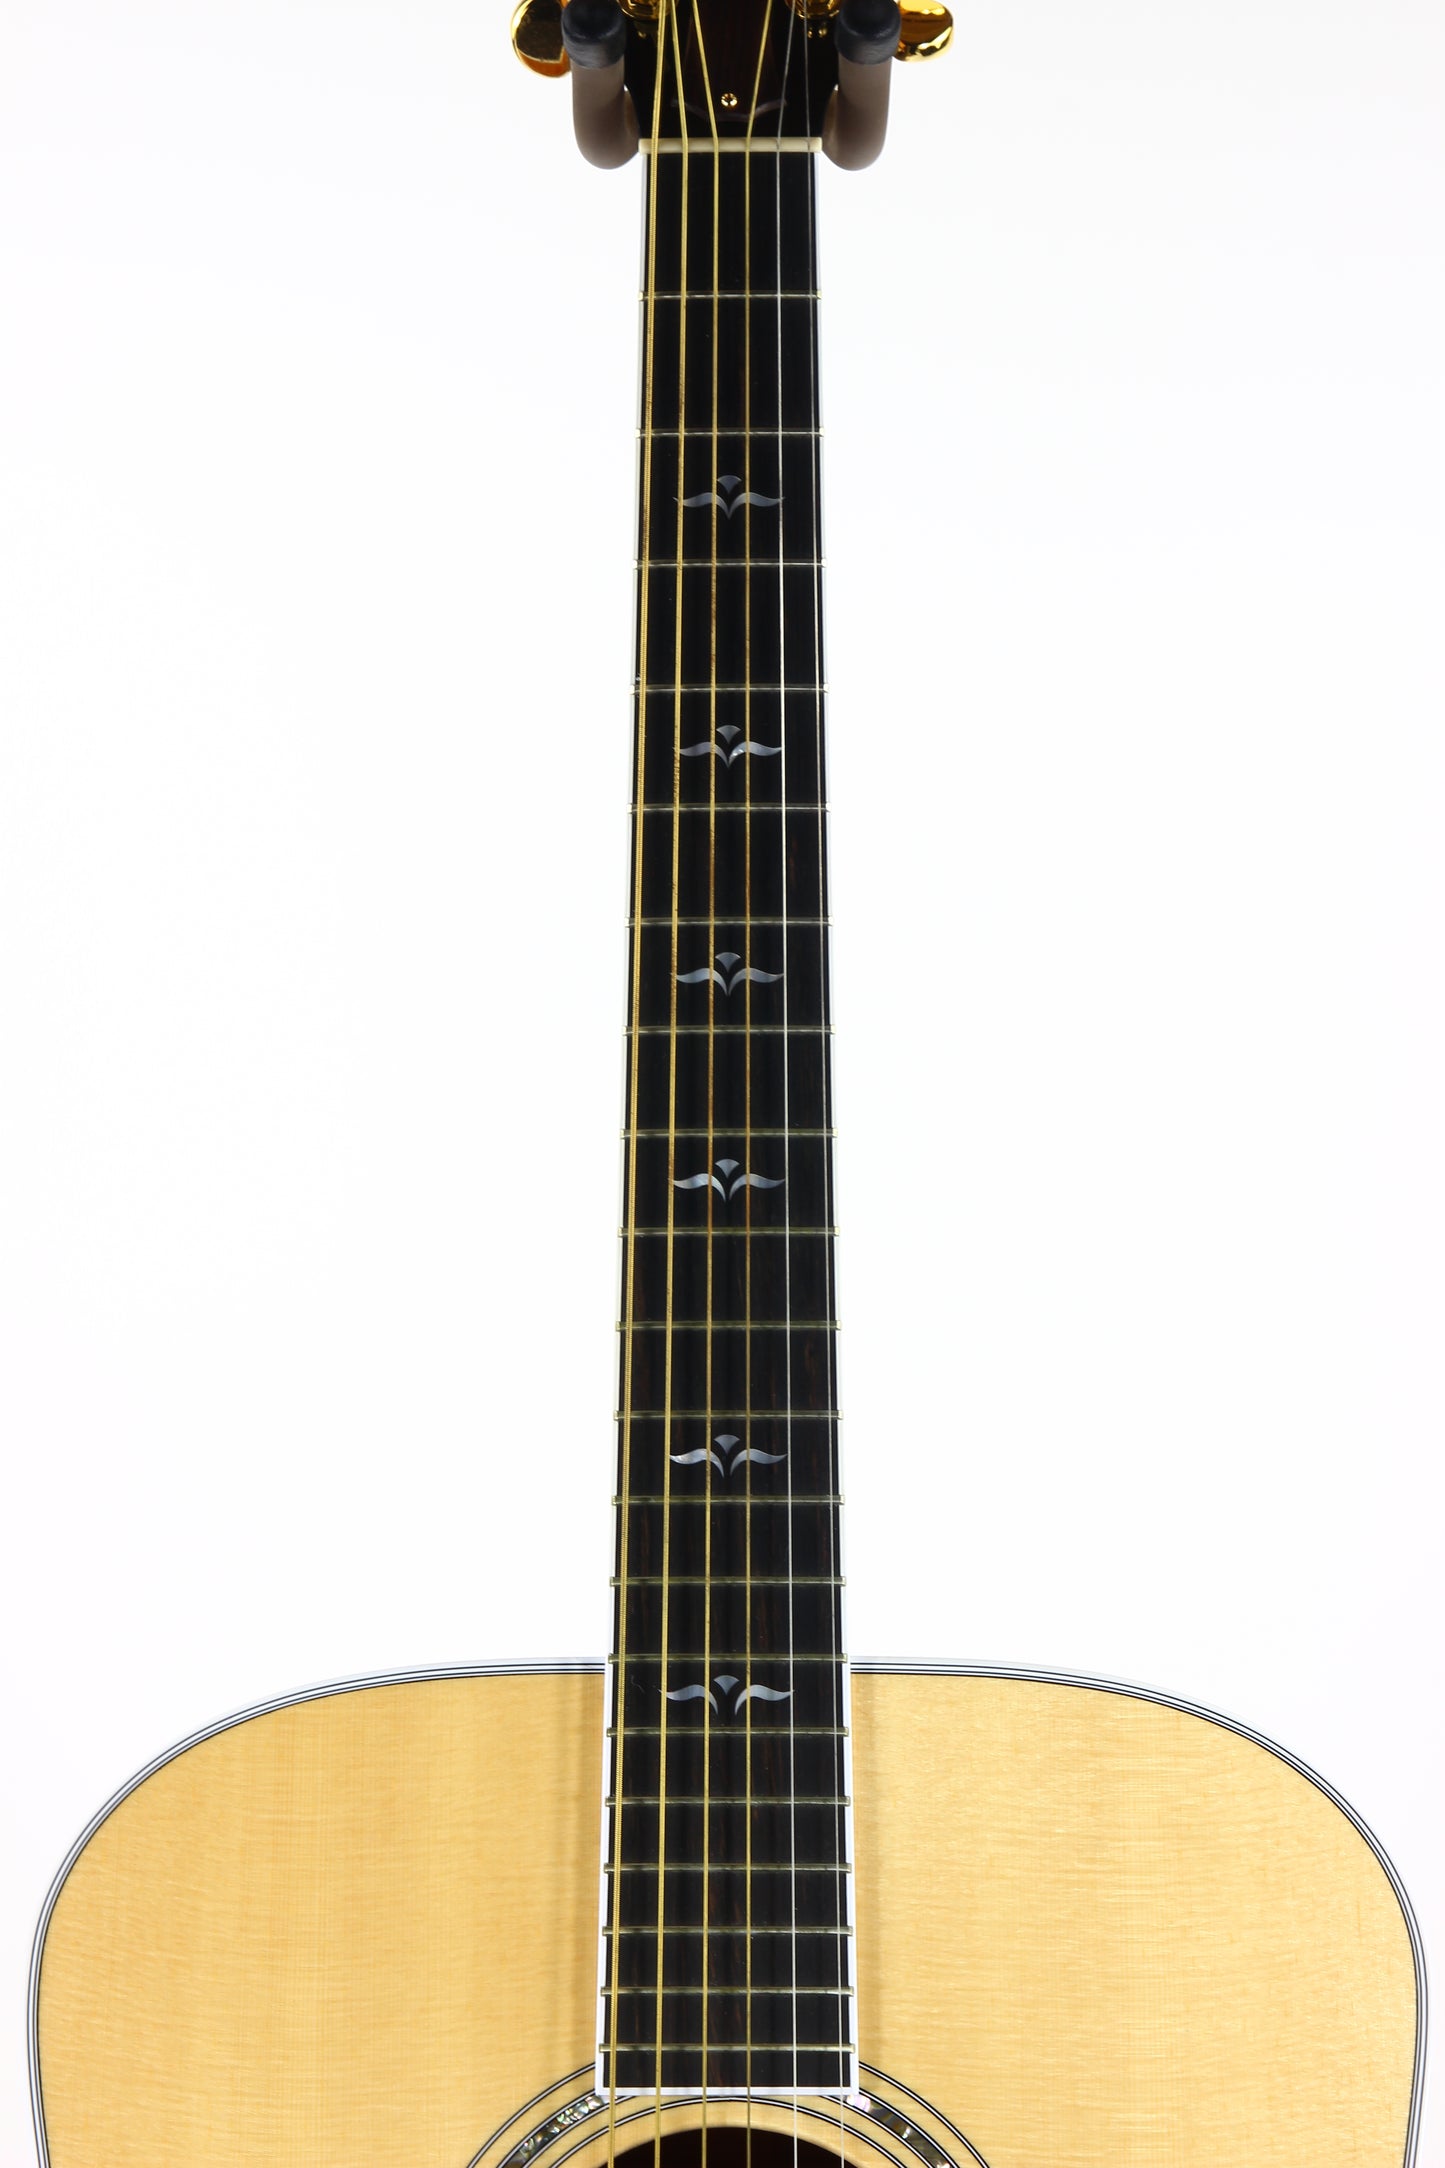 UNPLAYED! 1993 Taylor 610 Dreadnought - High-Grade QUILTED MAPLE, Ebony Fittings, Golden Era 1990's! 610e 610ce